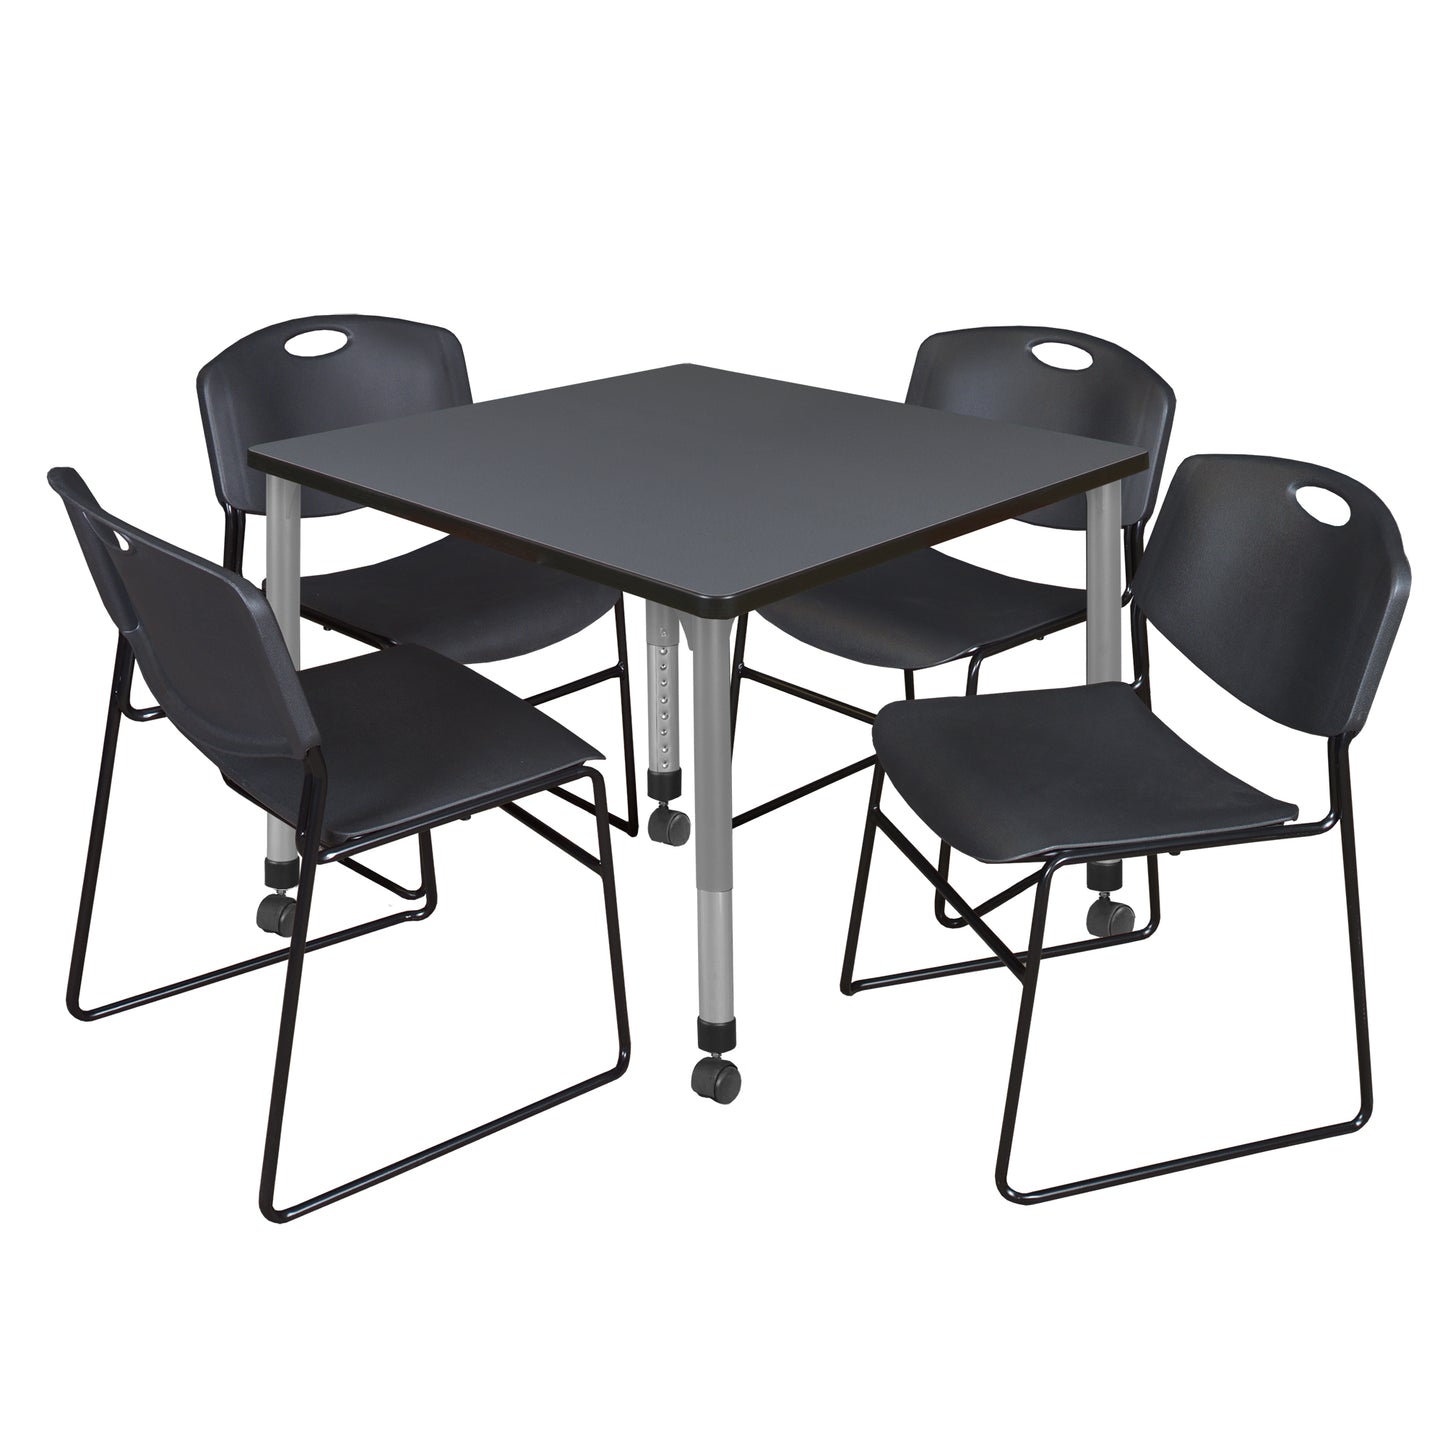 Regency Kee 42 in. Square Adjustable Classroom Table & 4 Zeng Stack Chairs